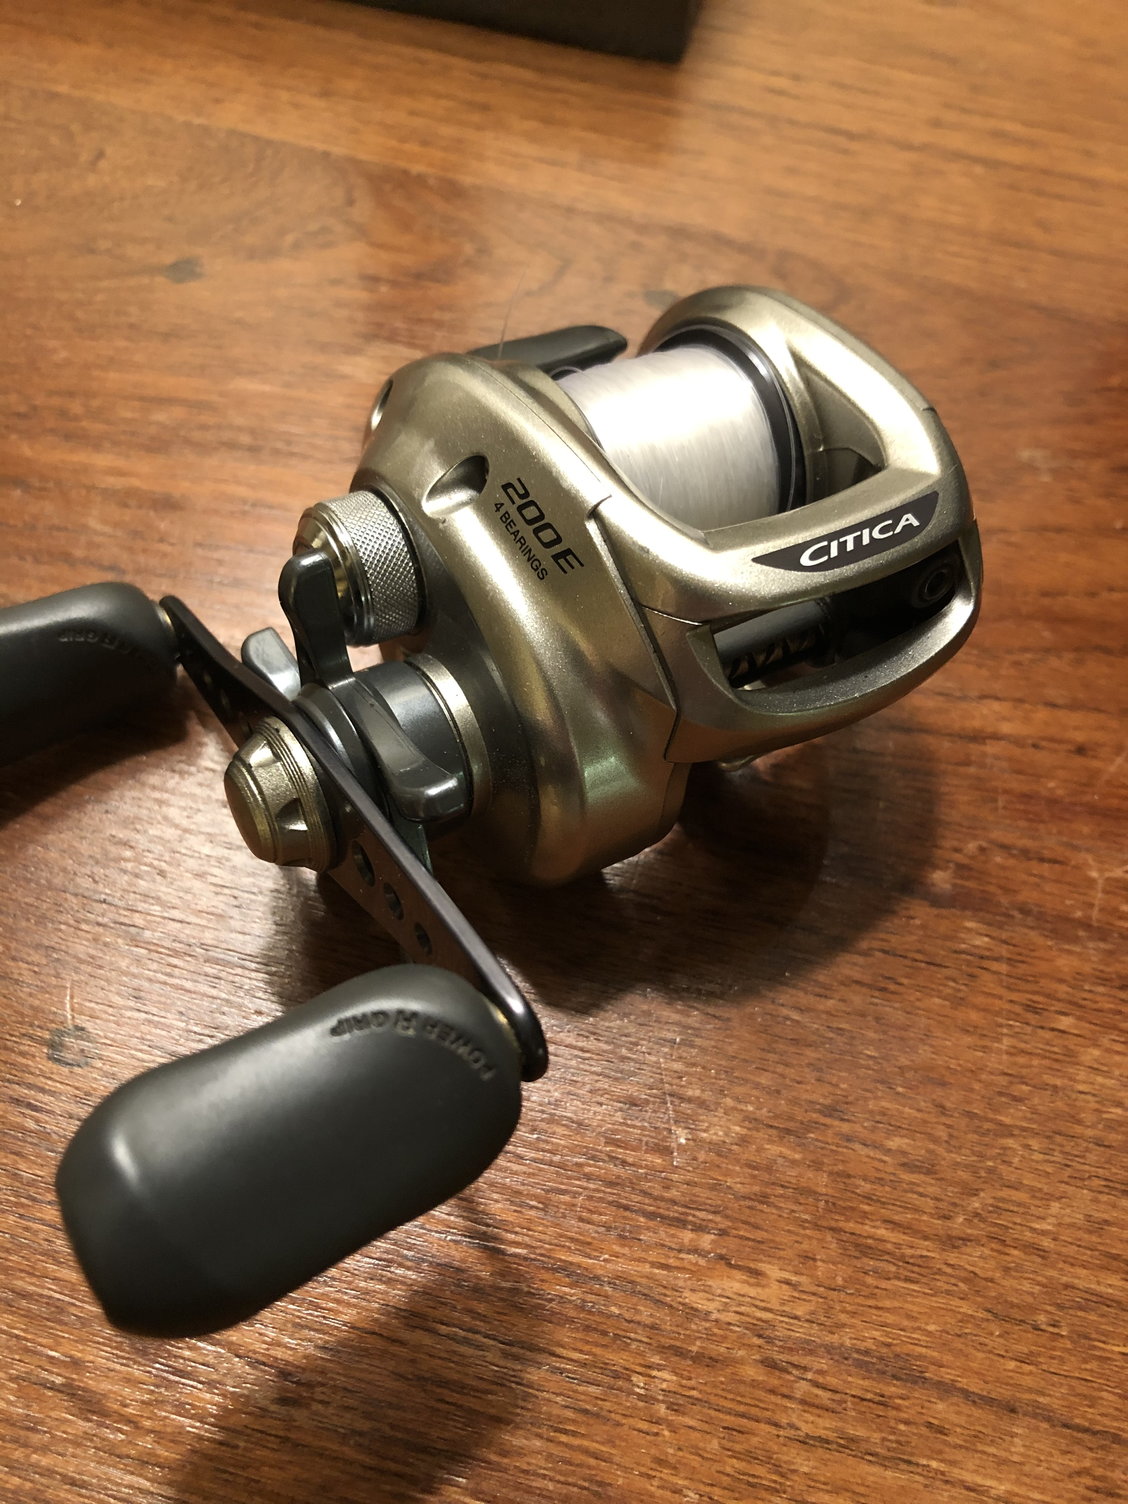 Shimano Citica 200e reel - The Hull Truth - Boating and Fishing Forum